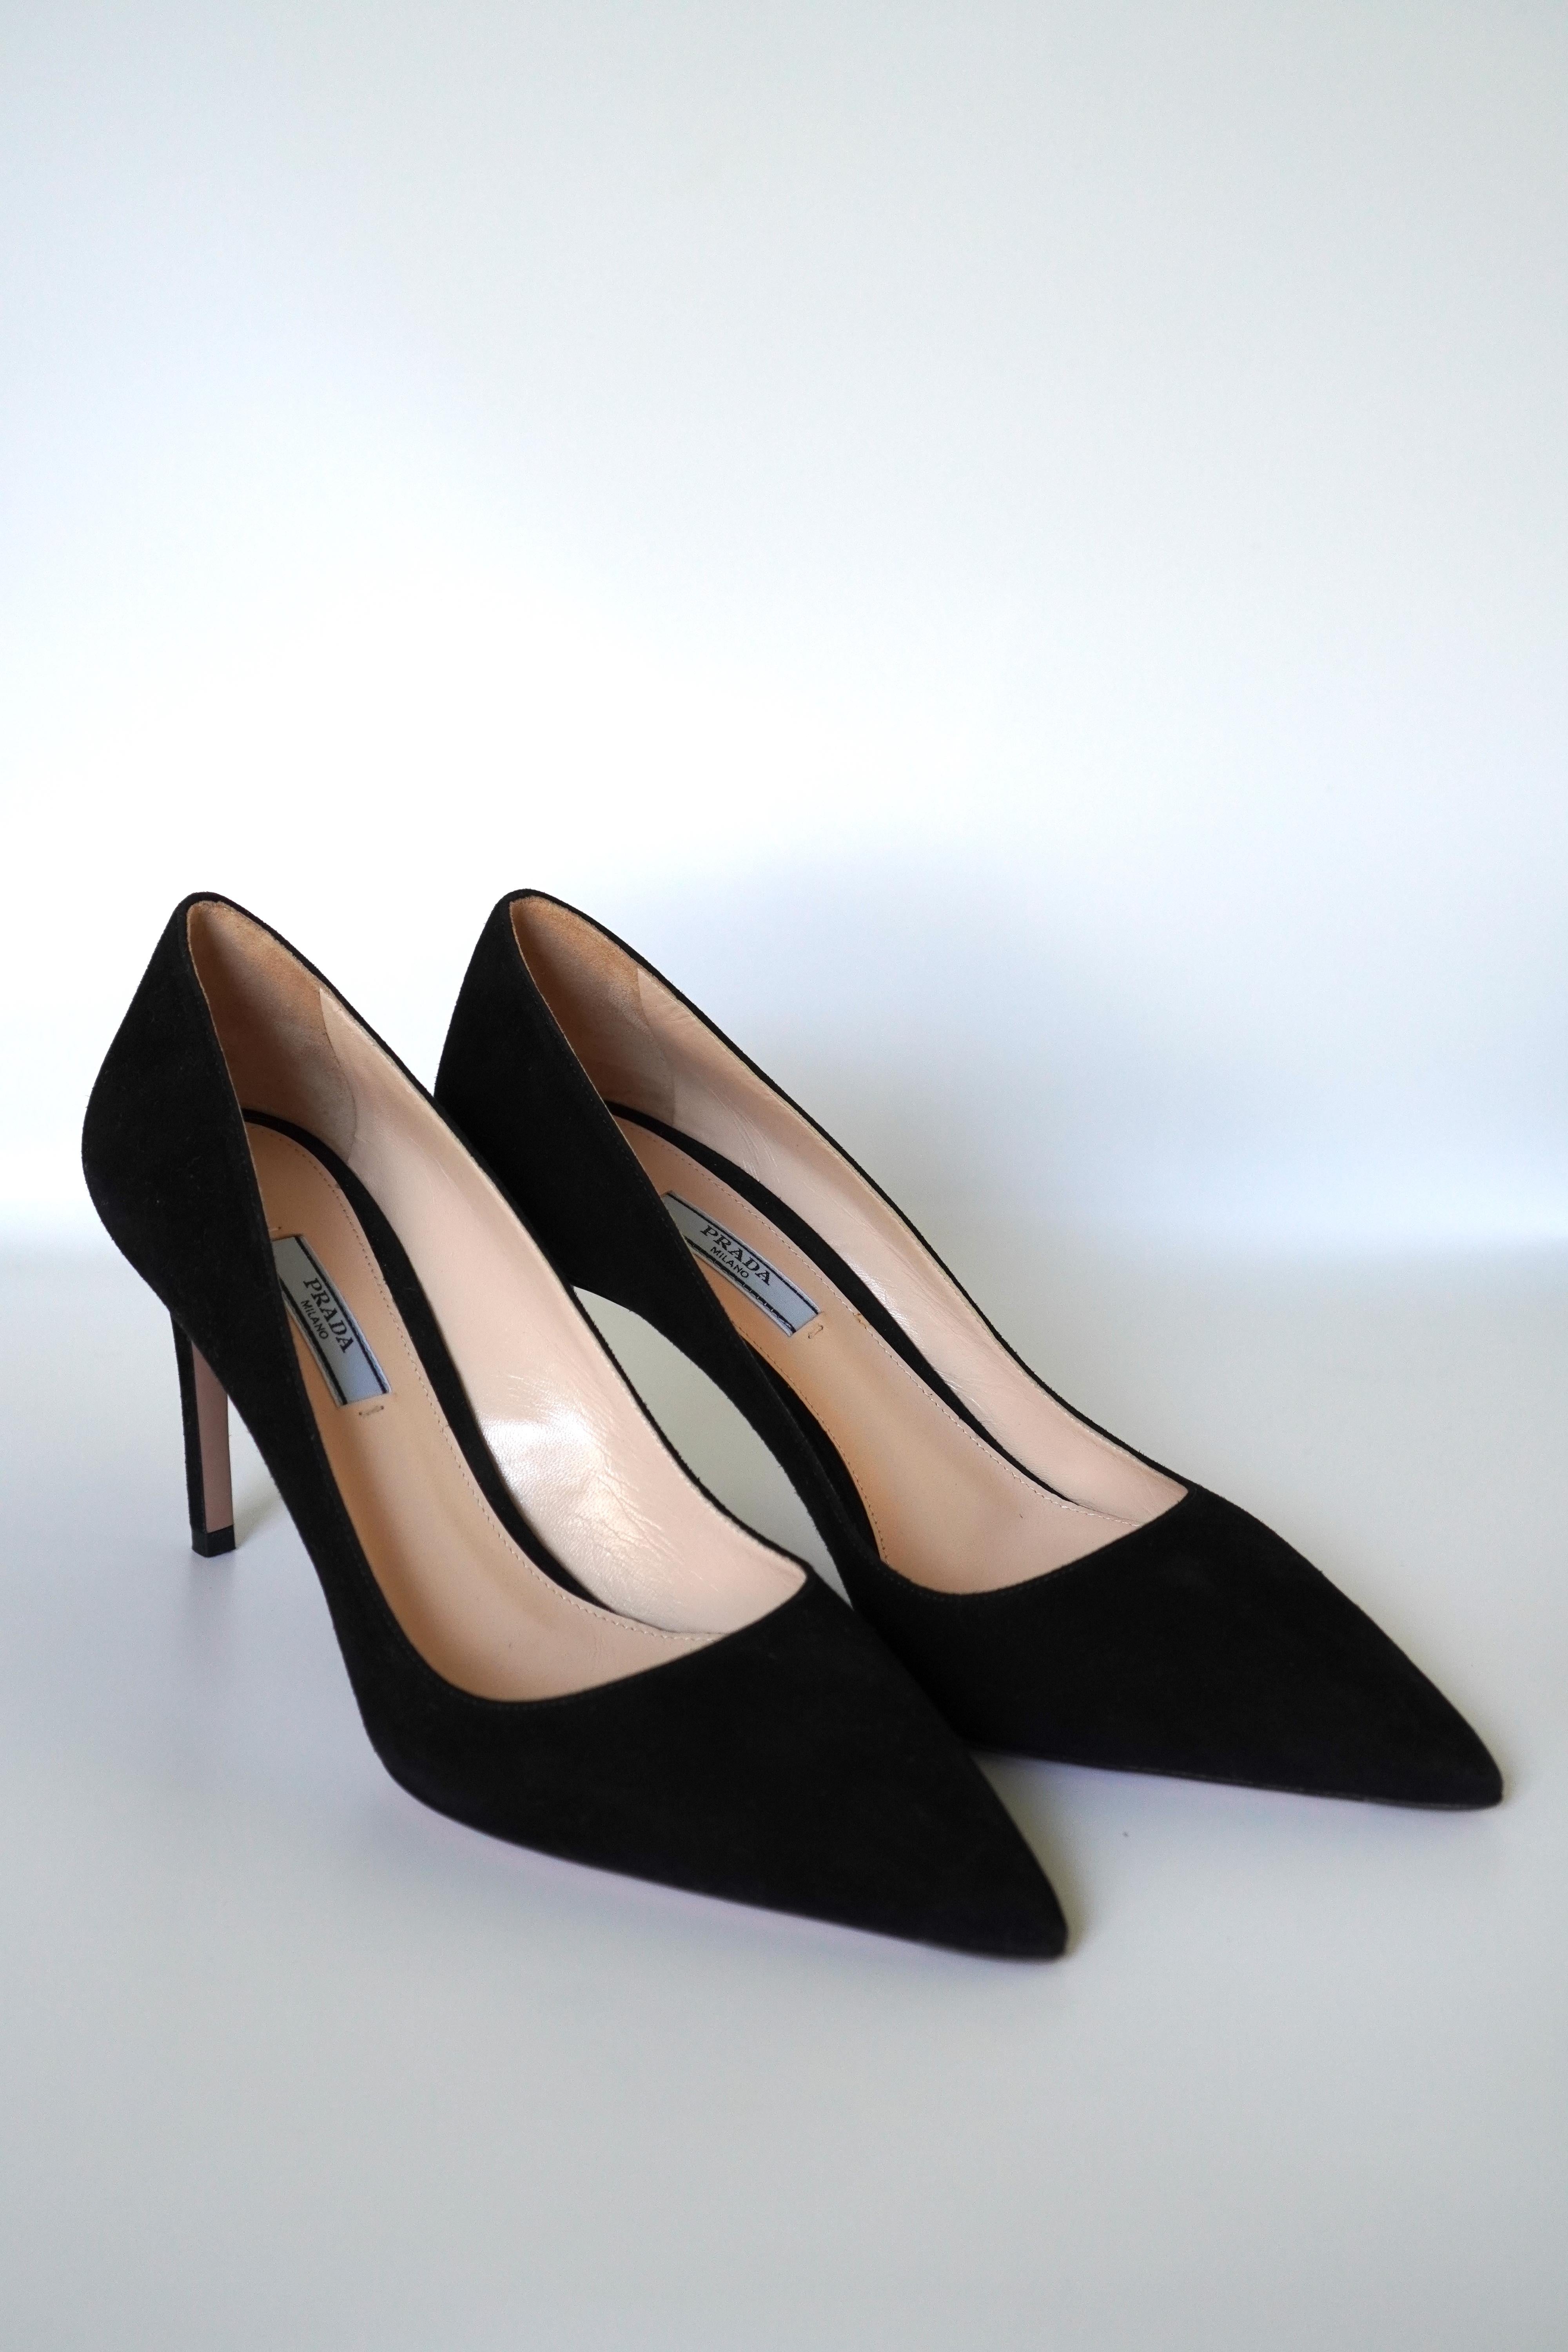 Prada Black Suede Pumps sz 41 In New Condition For Sale In Beverly Hills, CA